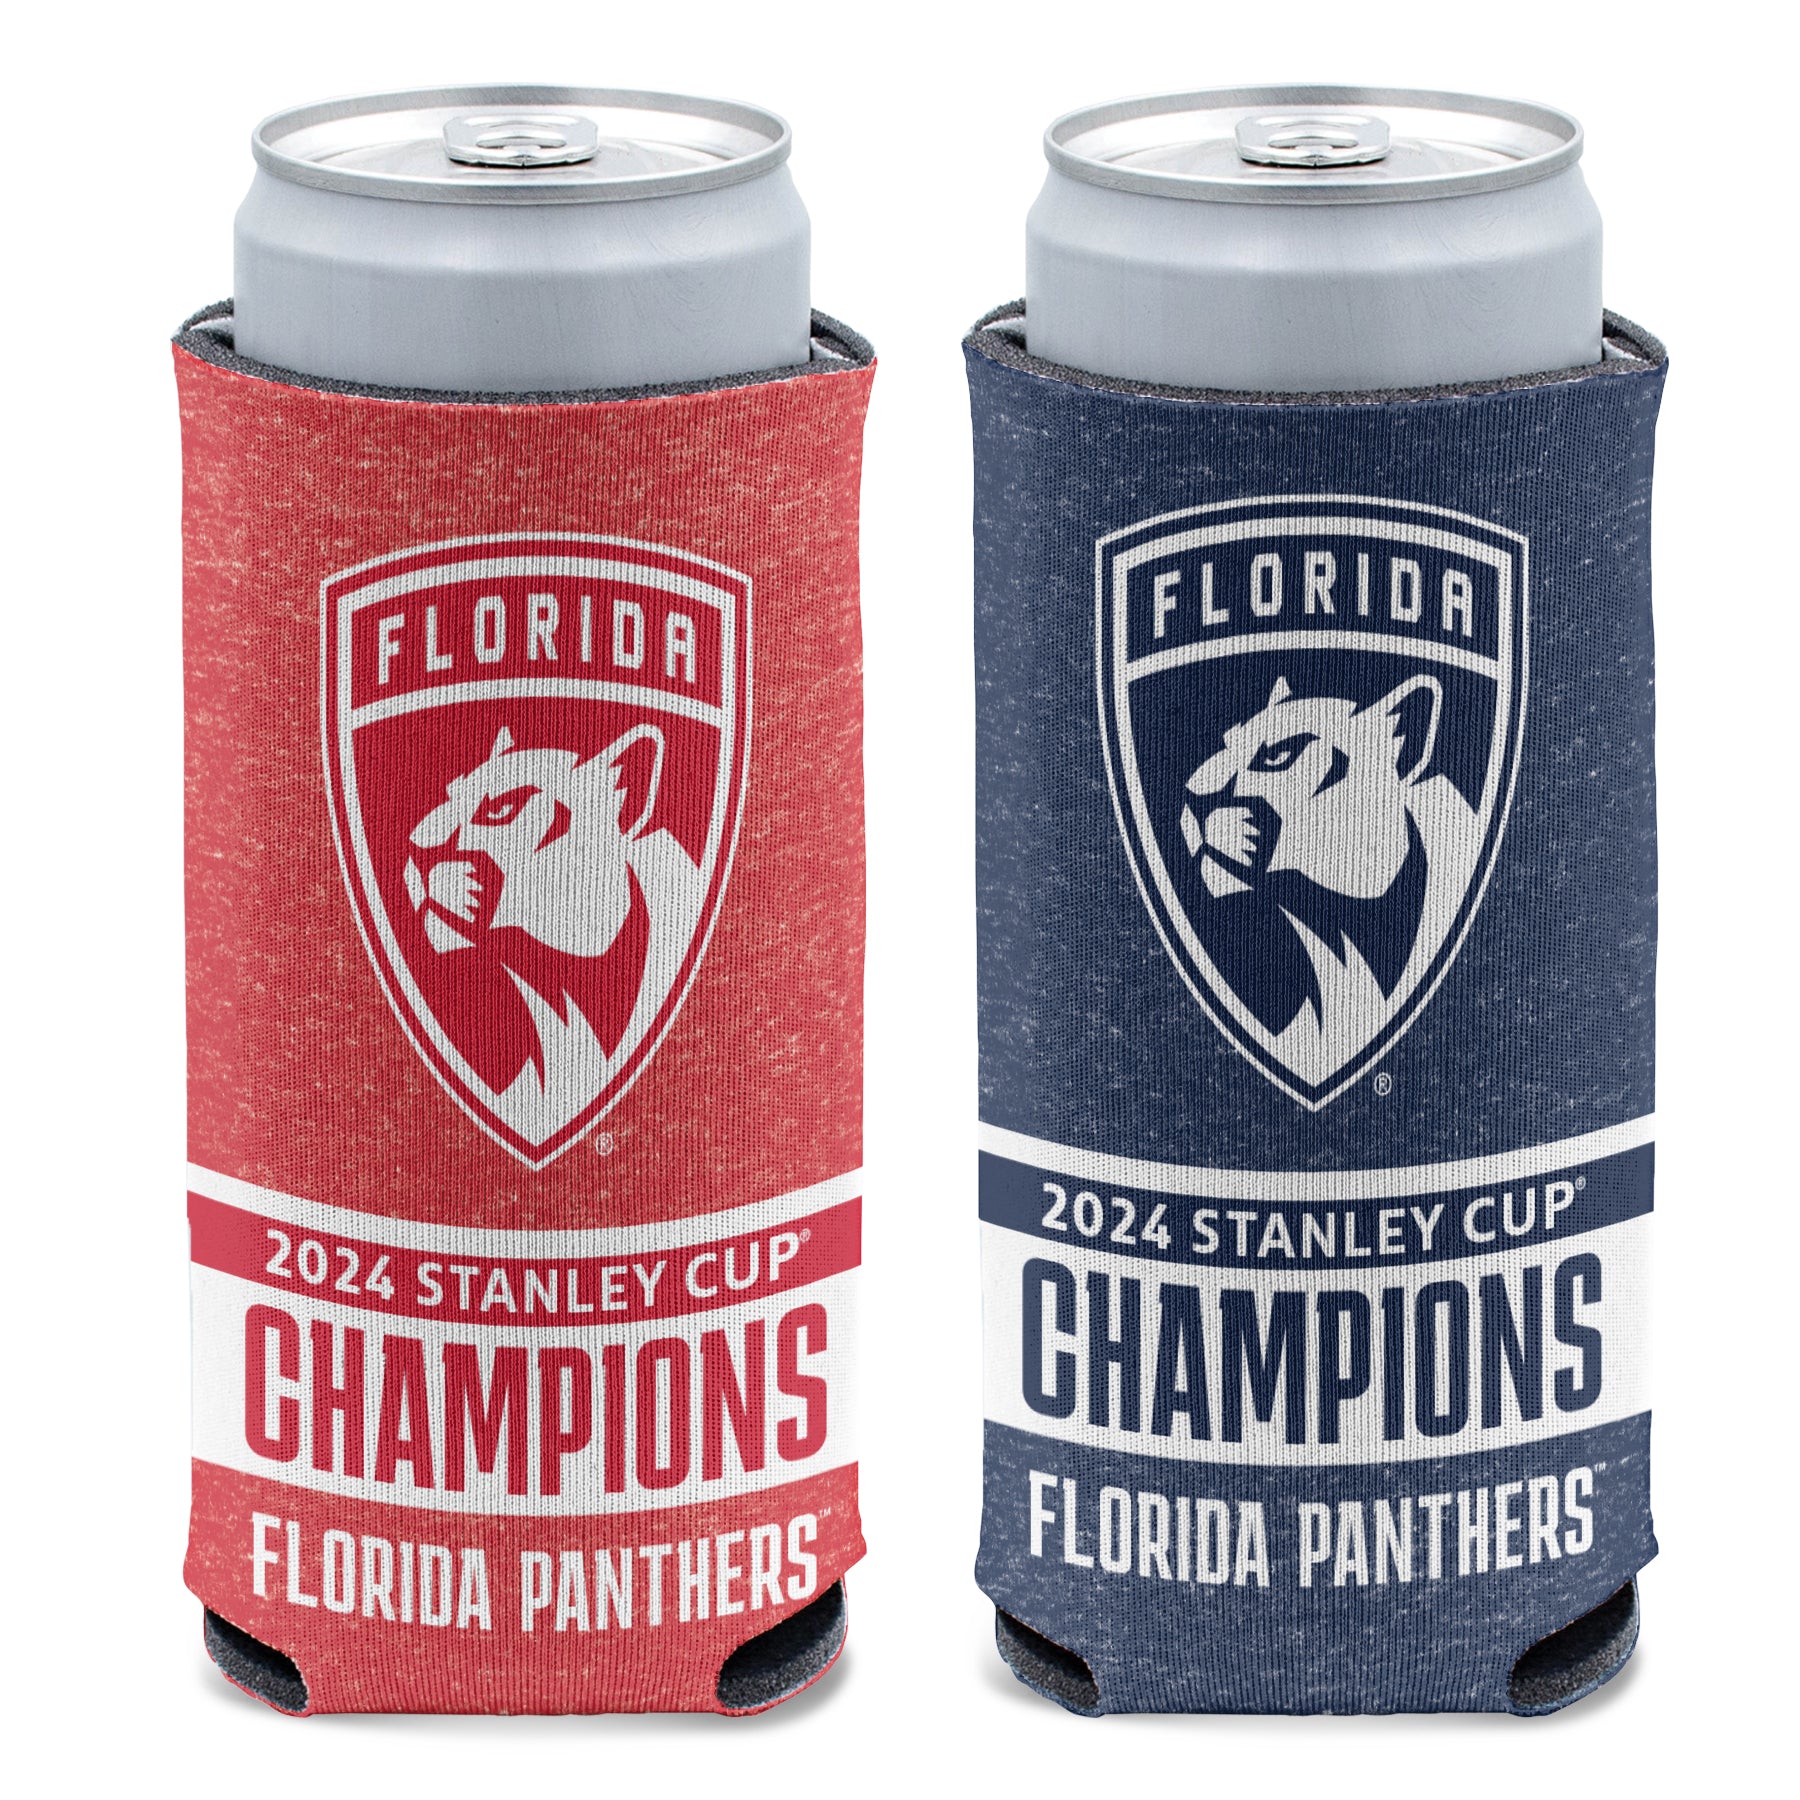 Florida Panthers 2024 Stanley Cup Champions 12oz Slim Can Cooler - Team Heather